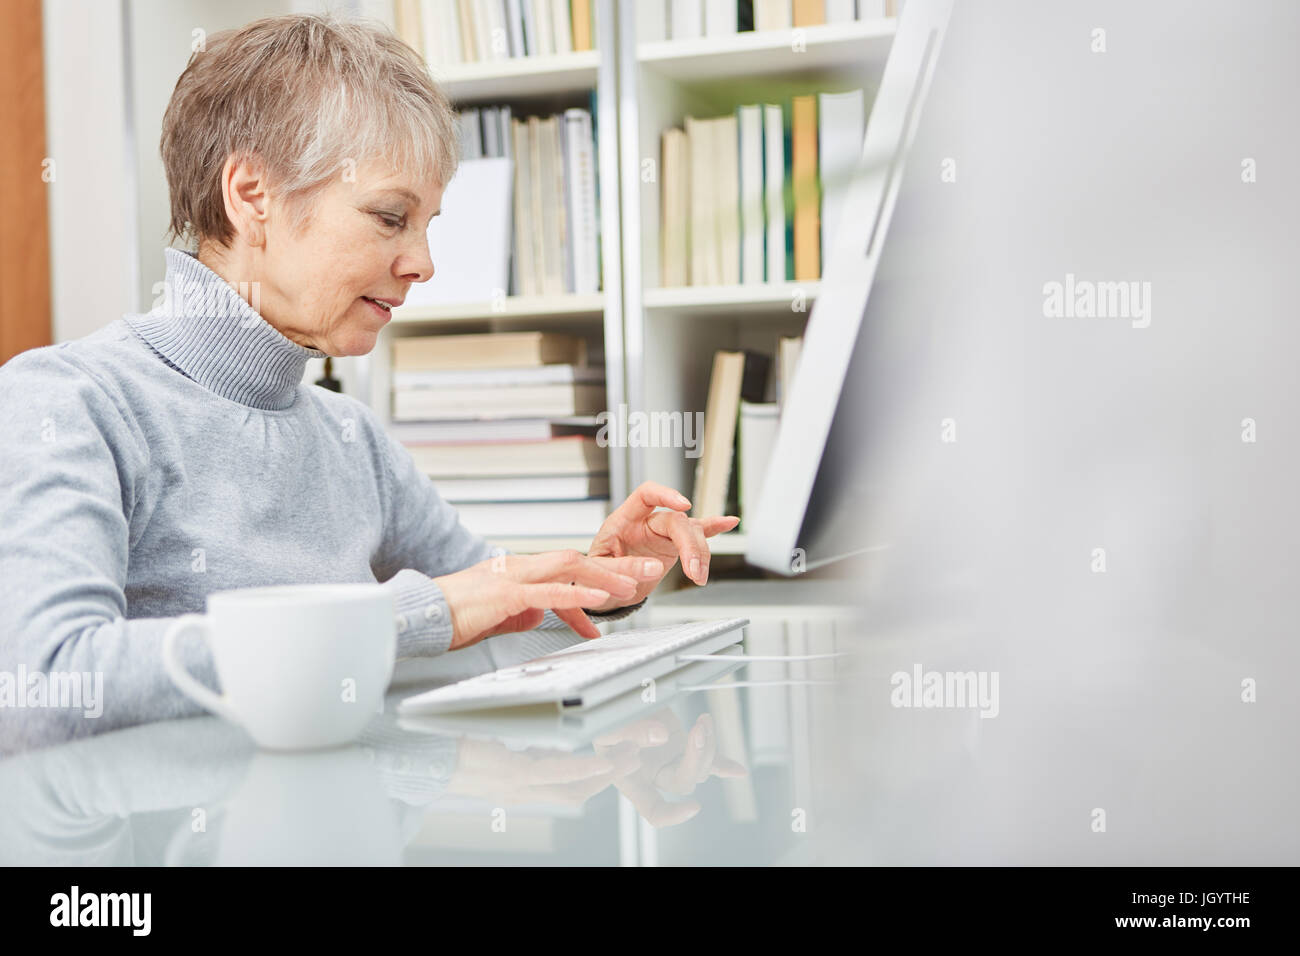 Senior woman surfing the internet with computer at home office Stock Photo